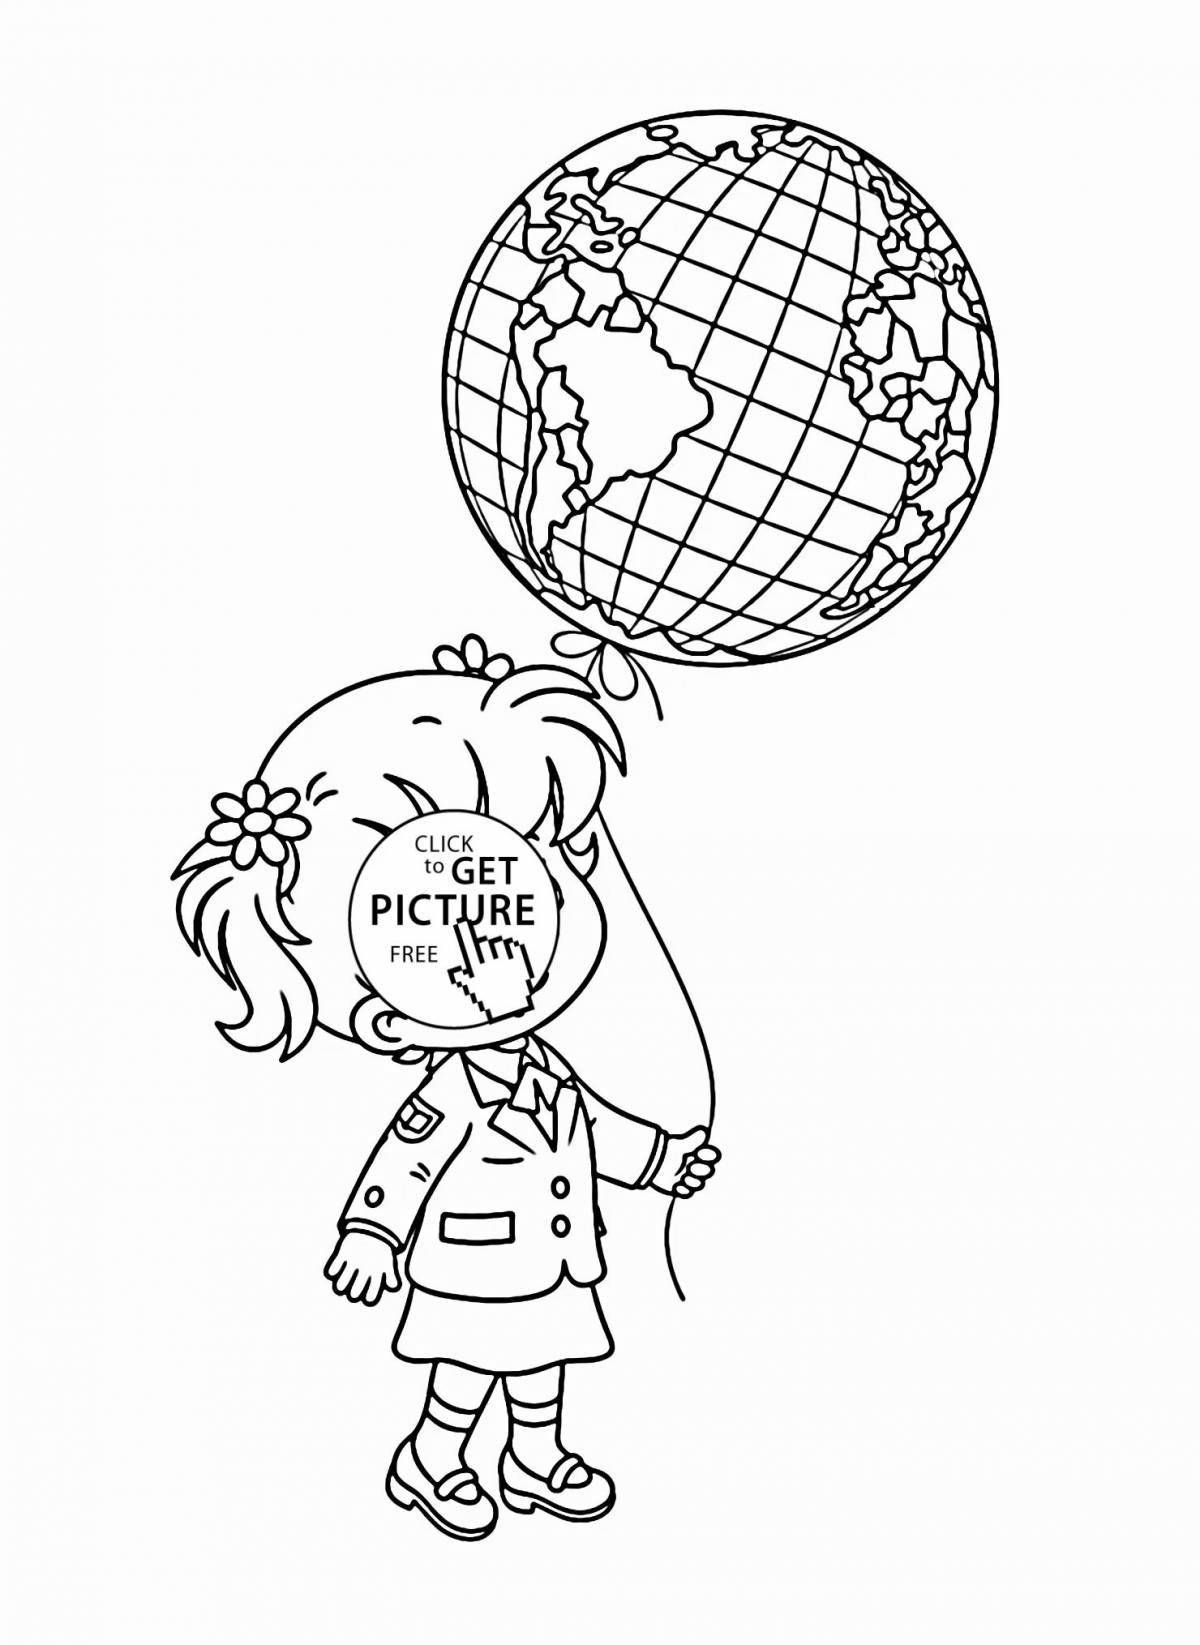 Charming globe coloring book for kids